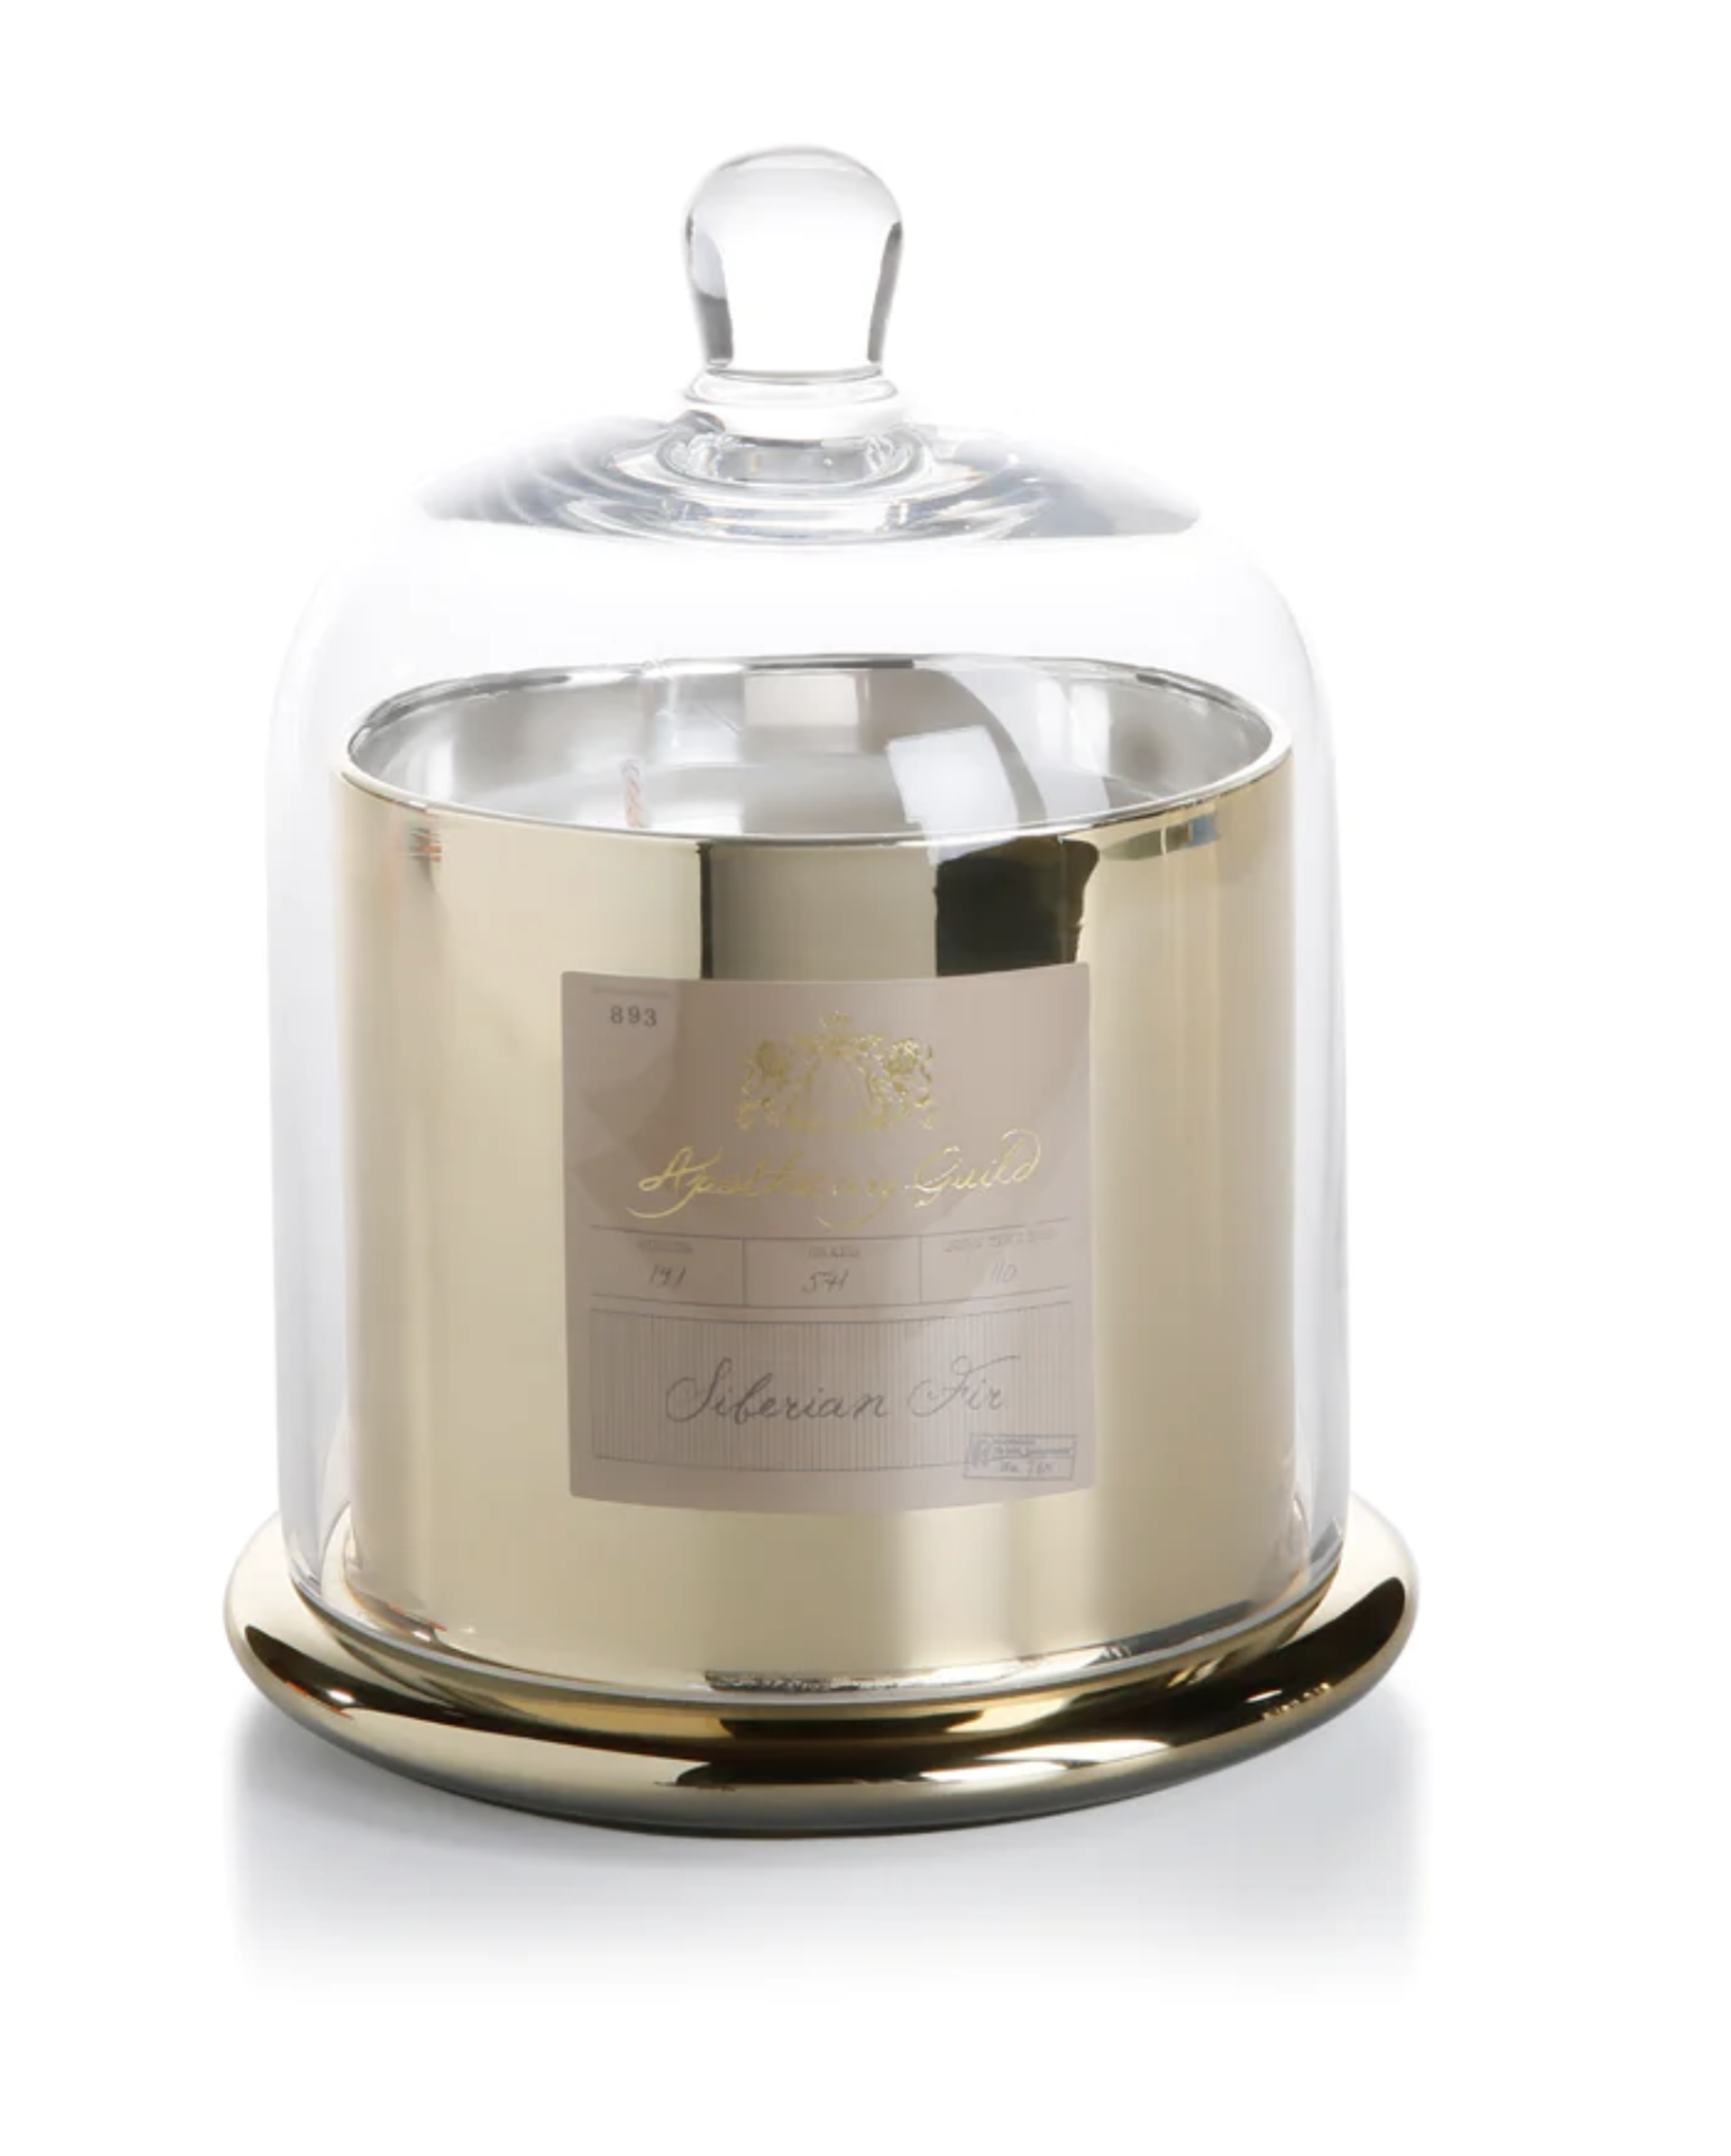 Apothecary Guild "Siberian Fir" Candle with Glass Dome - Medium by Argent